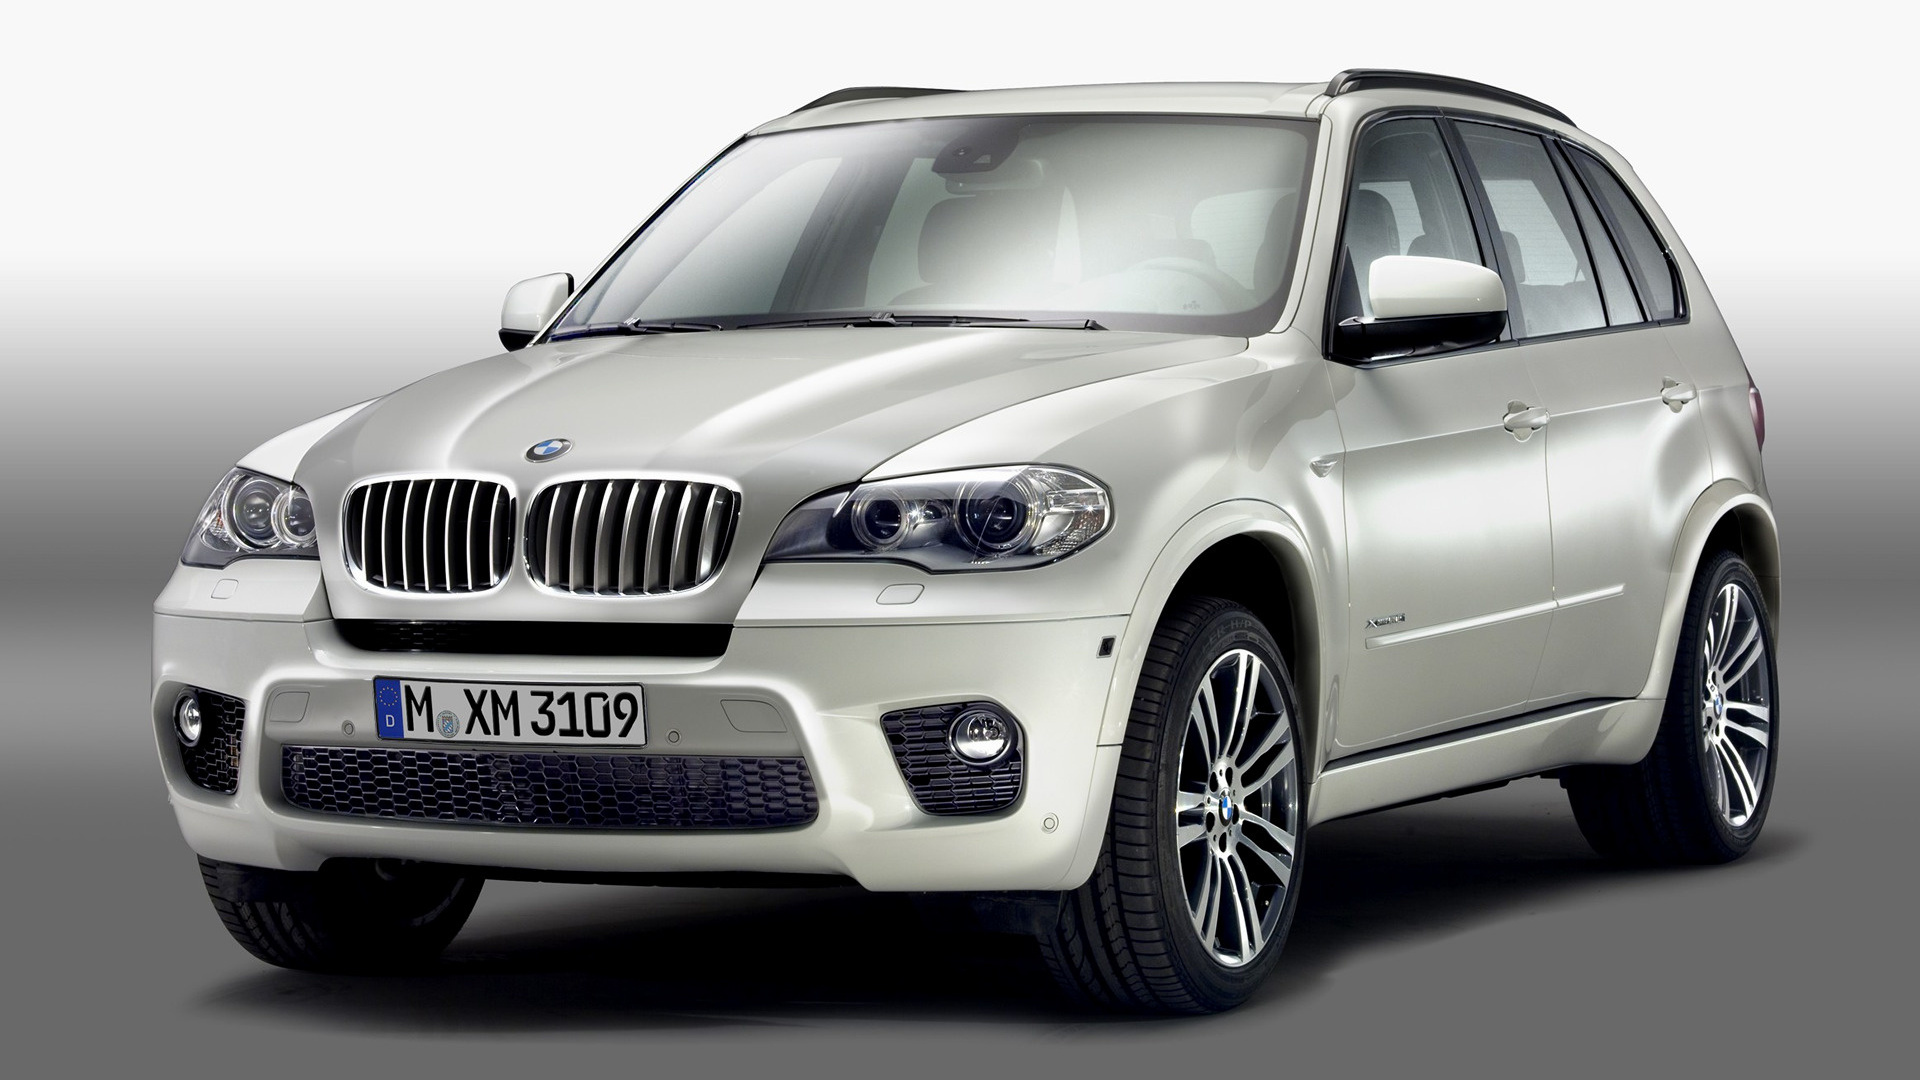 2010 BMW X5 M Sport - Wallpapers and HD Images | Car Pixel